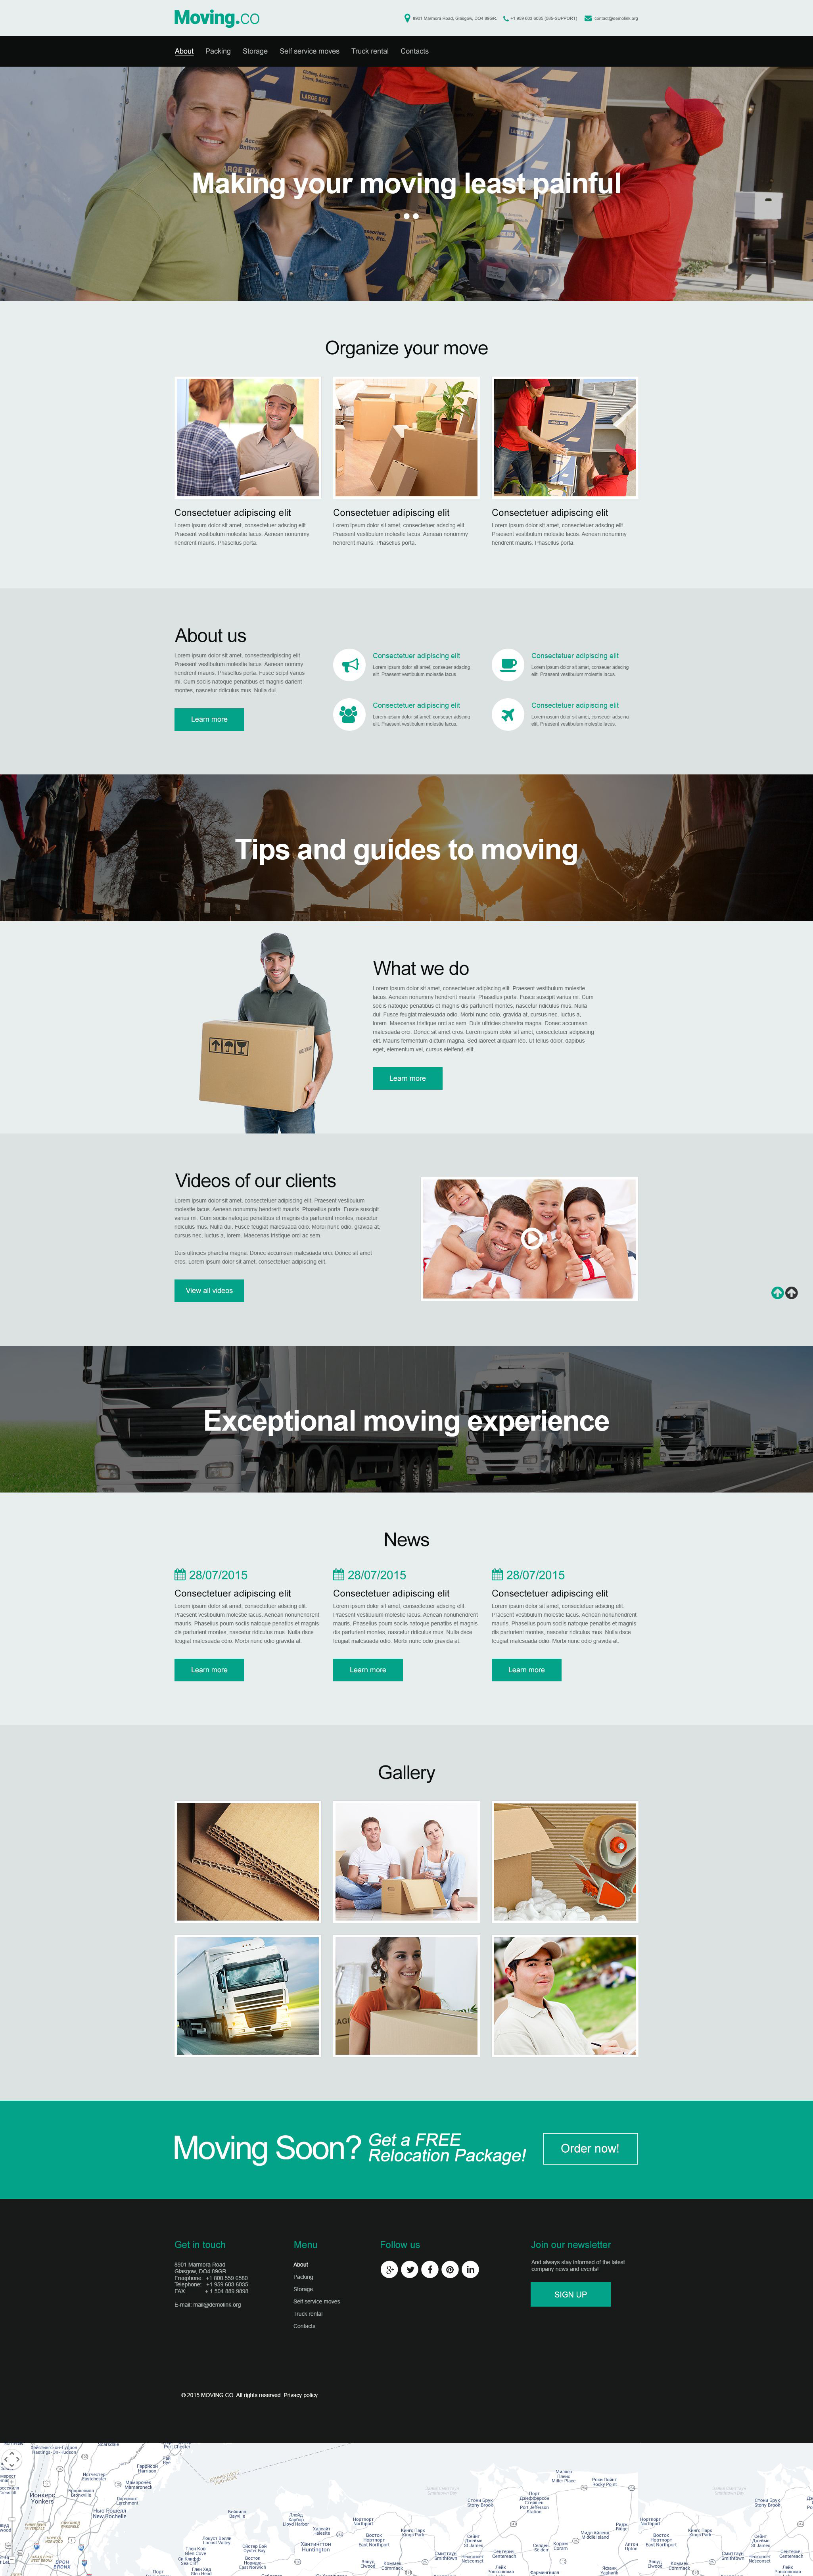 Muse Templates